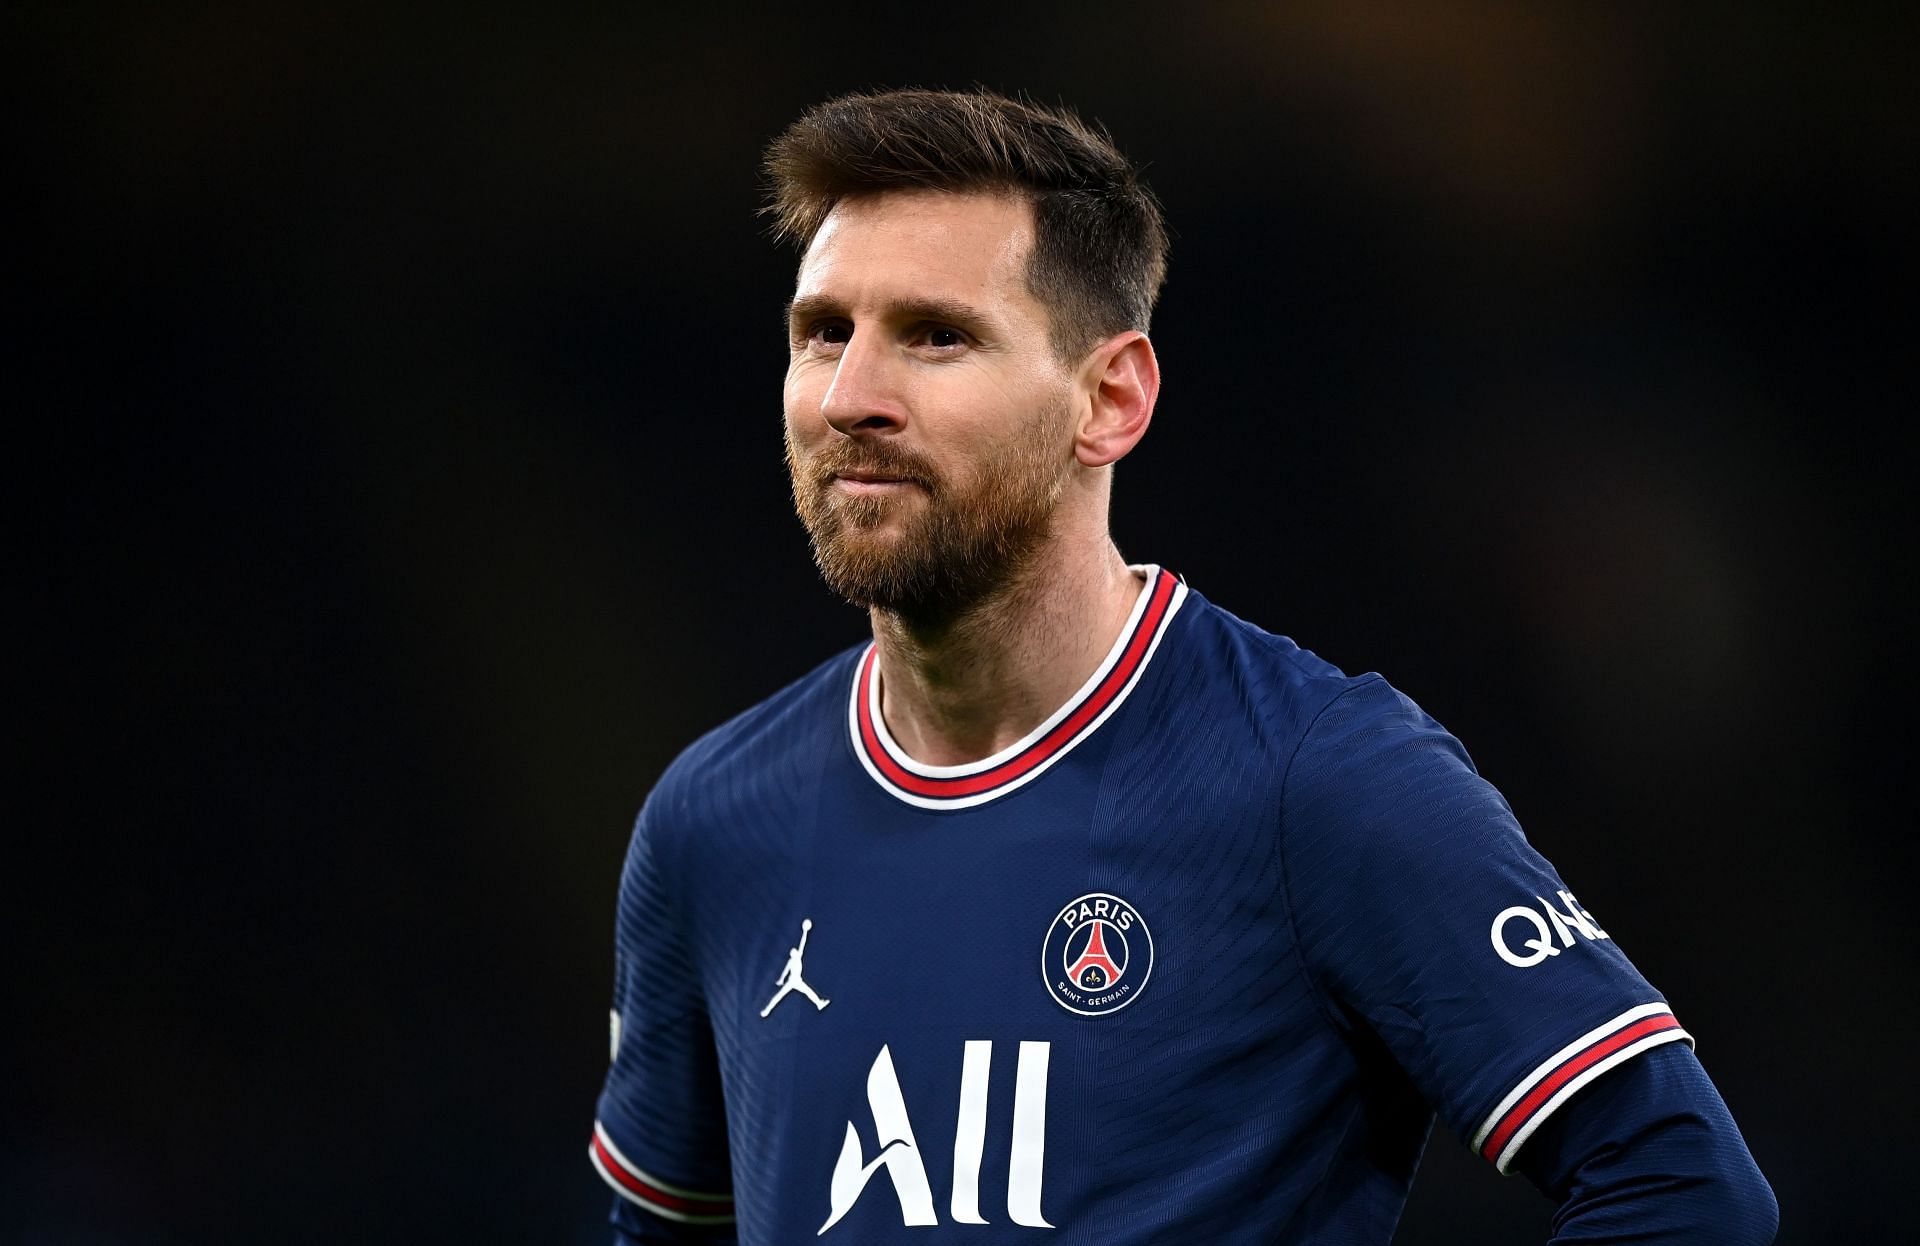 Lionel Messi will have to inspire PSG to their first Champions League trophy.